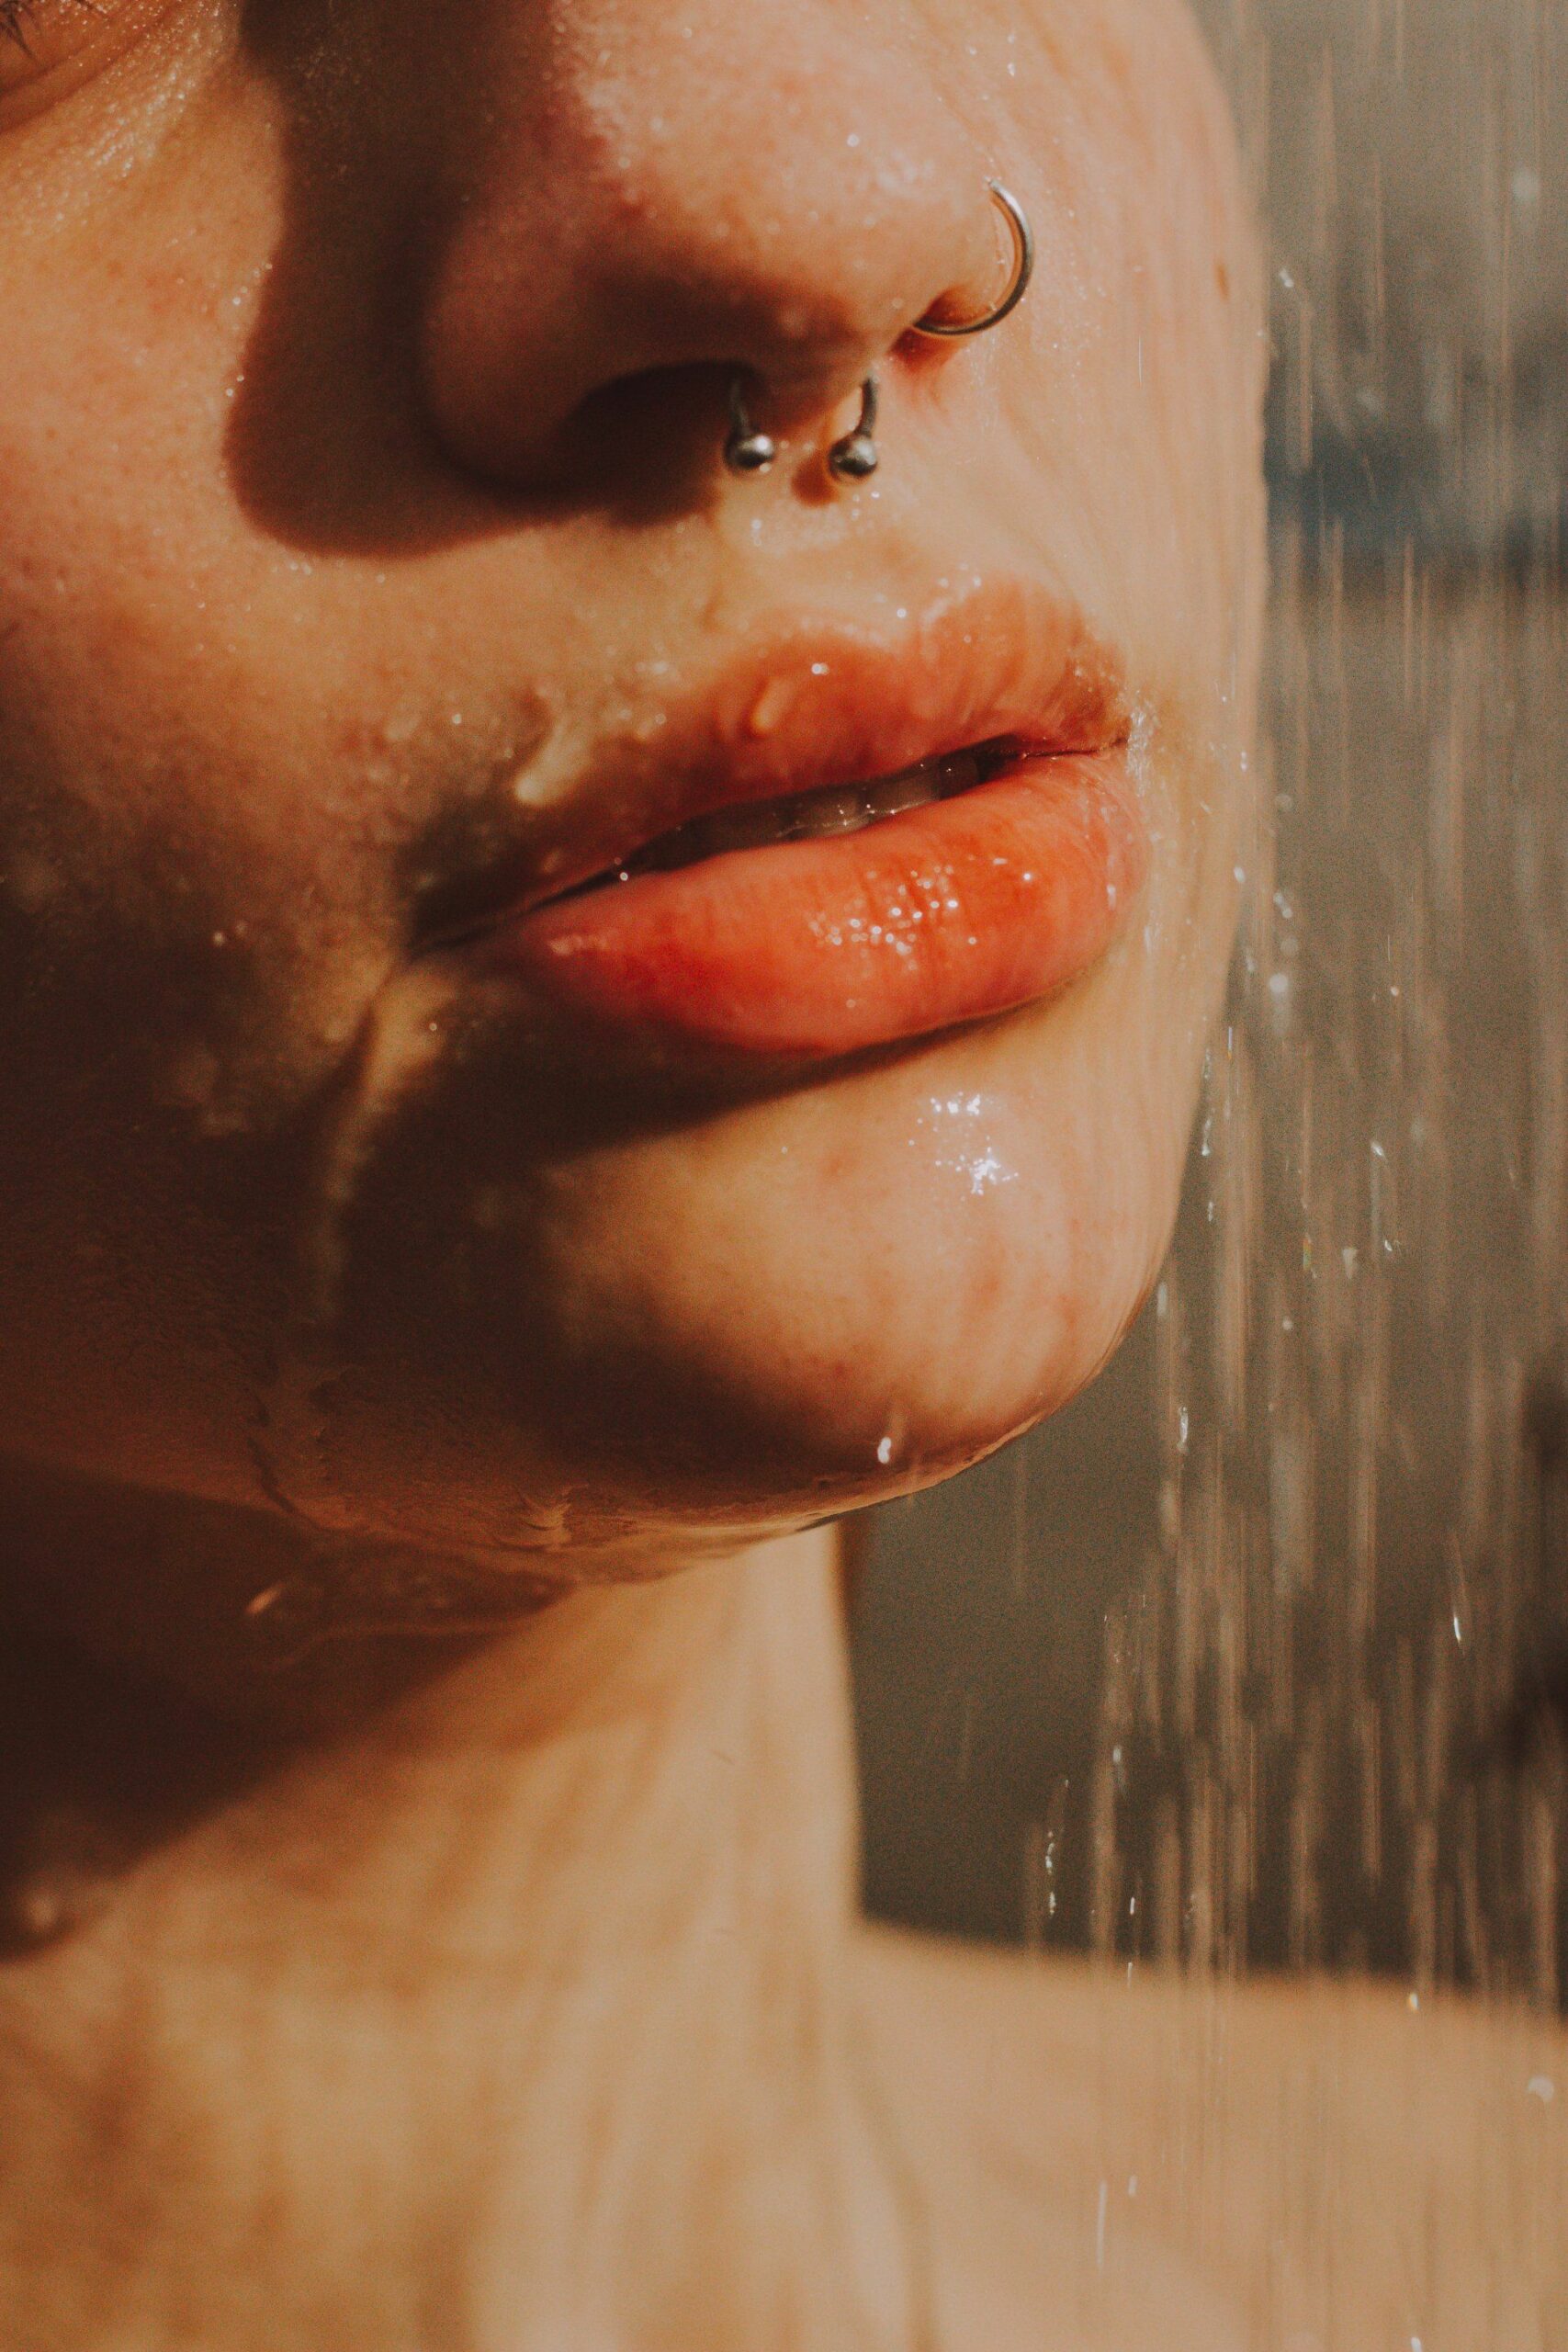 A woman's lips getting wet while standing in the shower